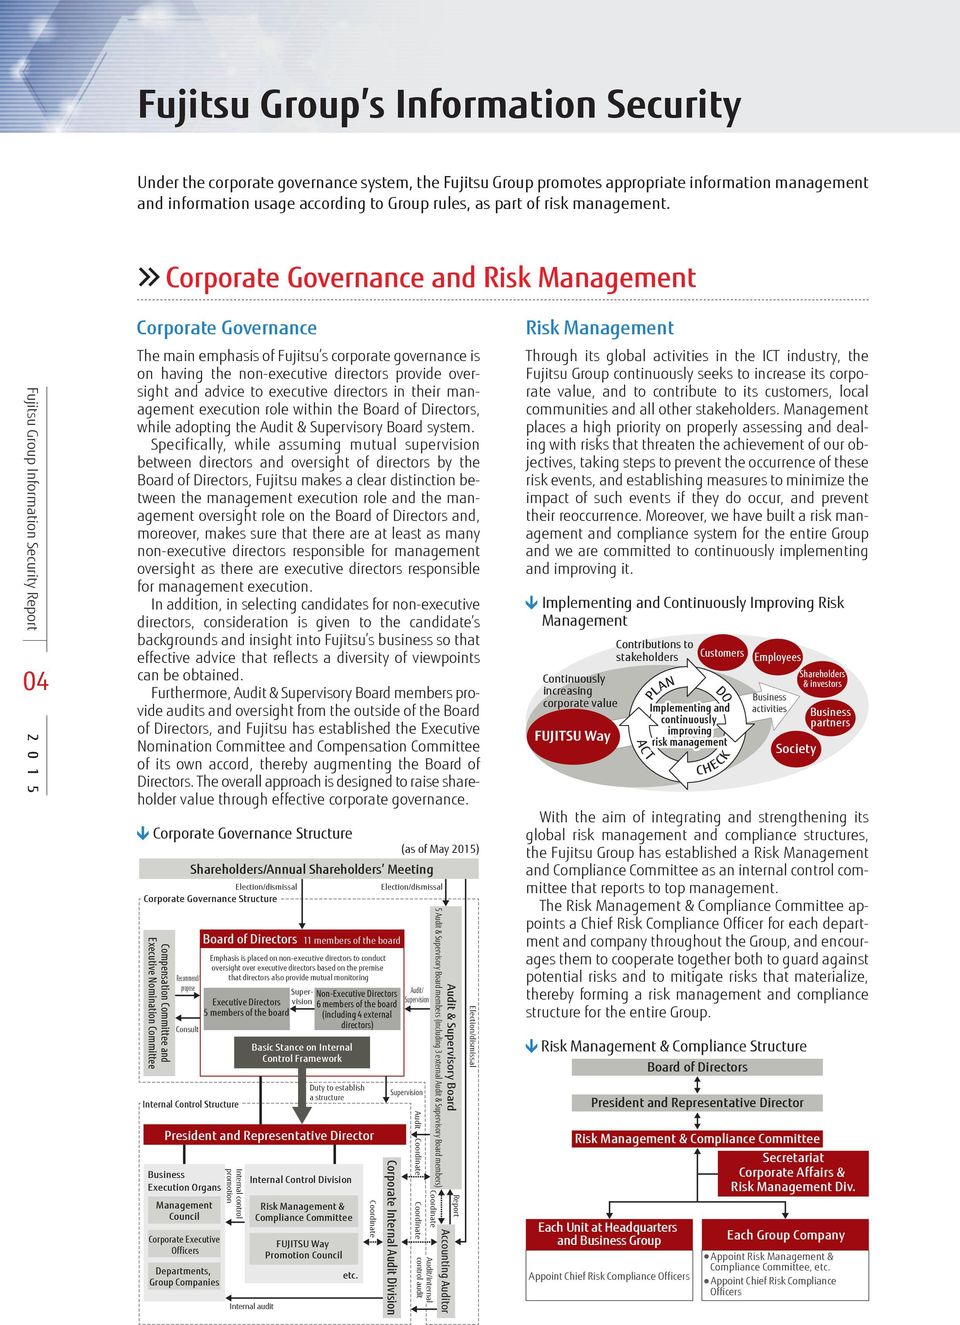 Corporate Governance and Risk Management Fujitsu Group Information Report 2 0 1 5 04 Corporate Governance The main emphasis of Fujitsu s corporate governance is on having the non-executive directors